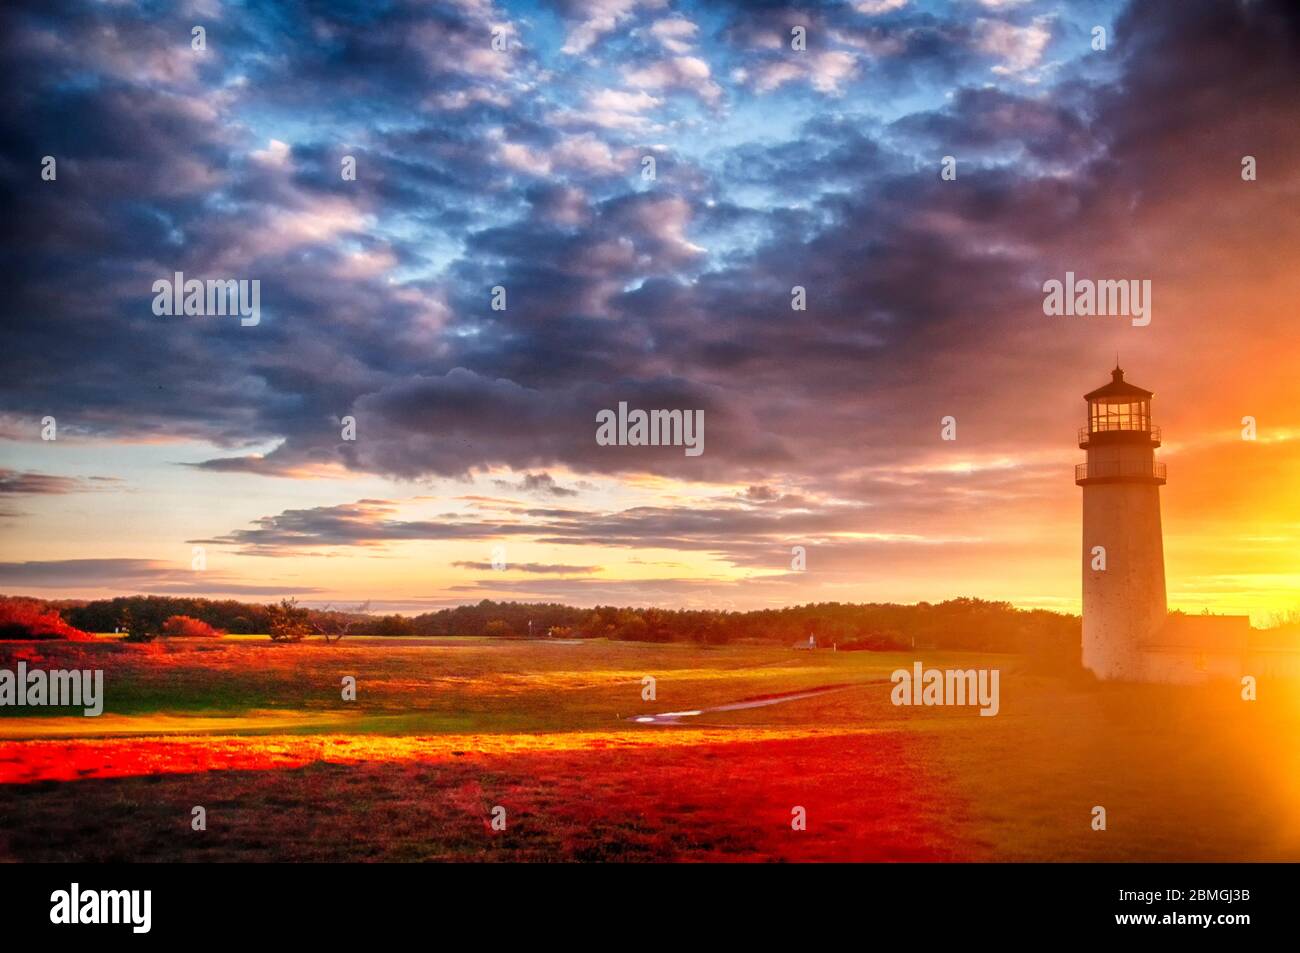 The highland lighthouse in north truro massachusetts on cape cod against a dramatic orange sunset sky. Stock Photo